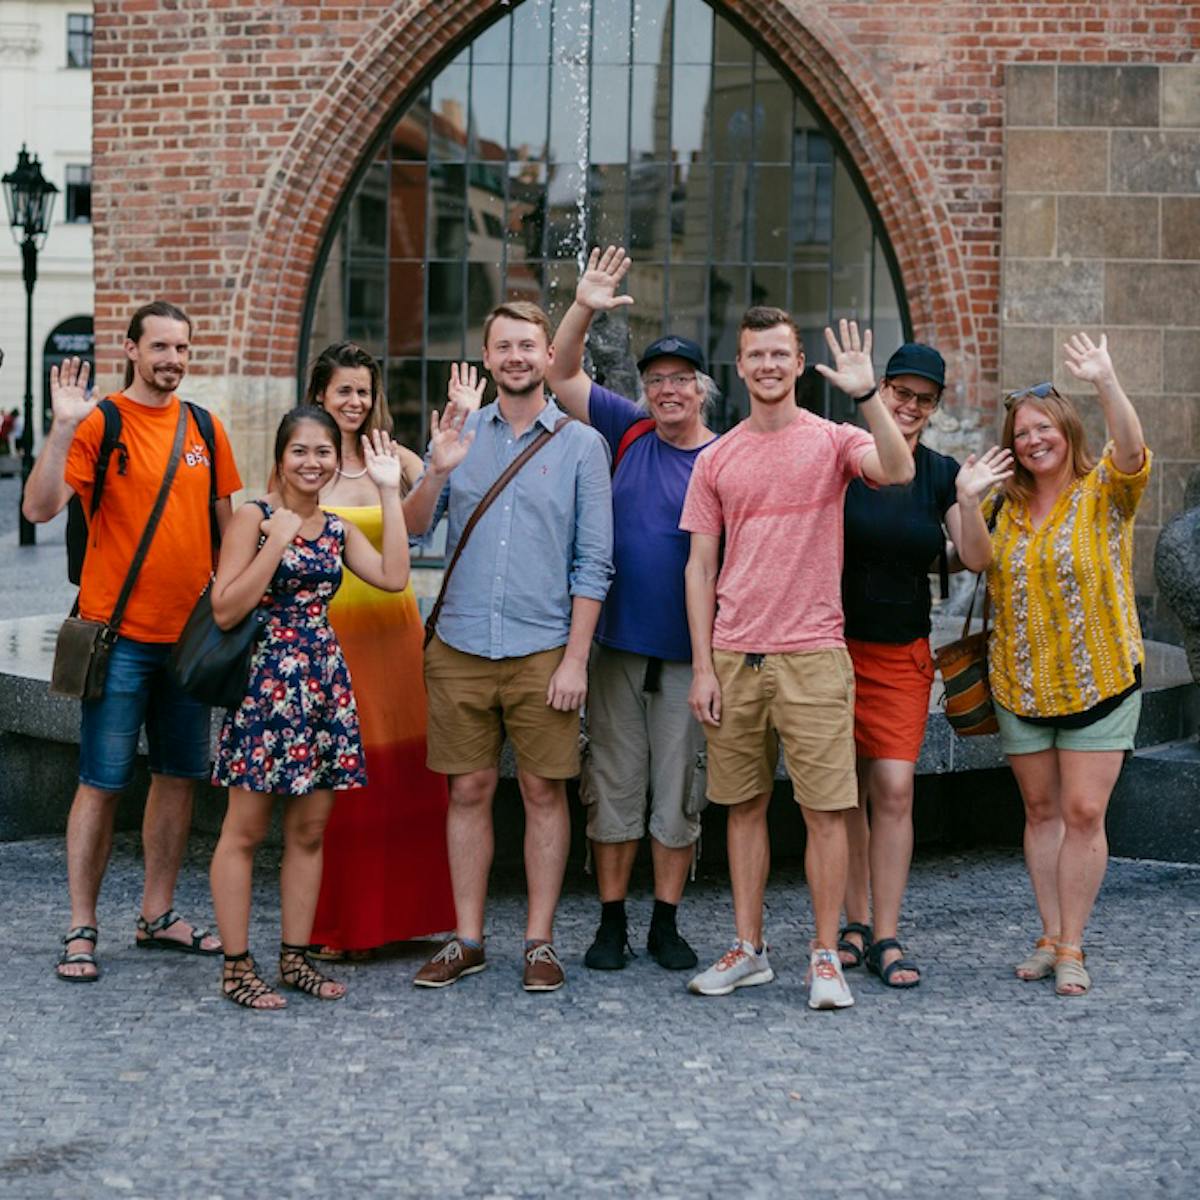 Prague City Adventures team standing together and waiving at the camera